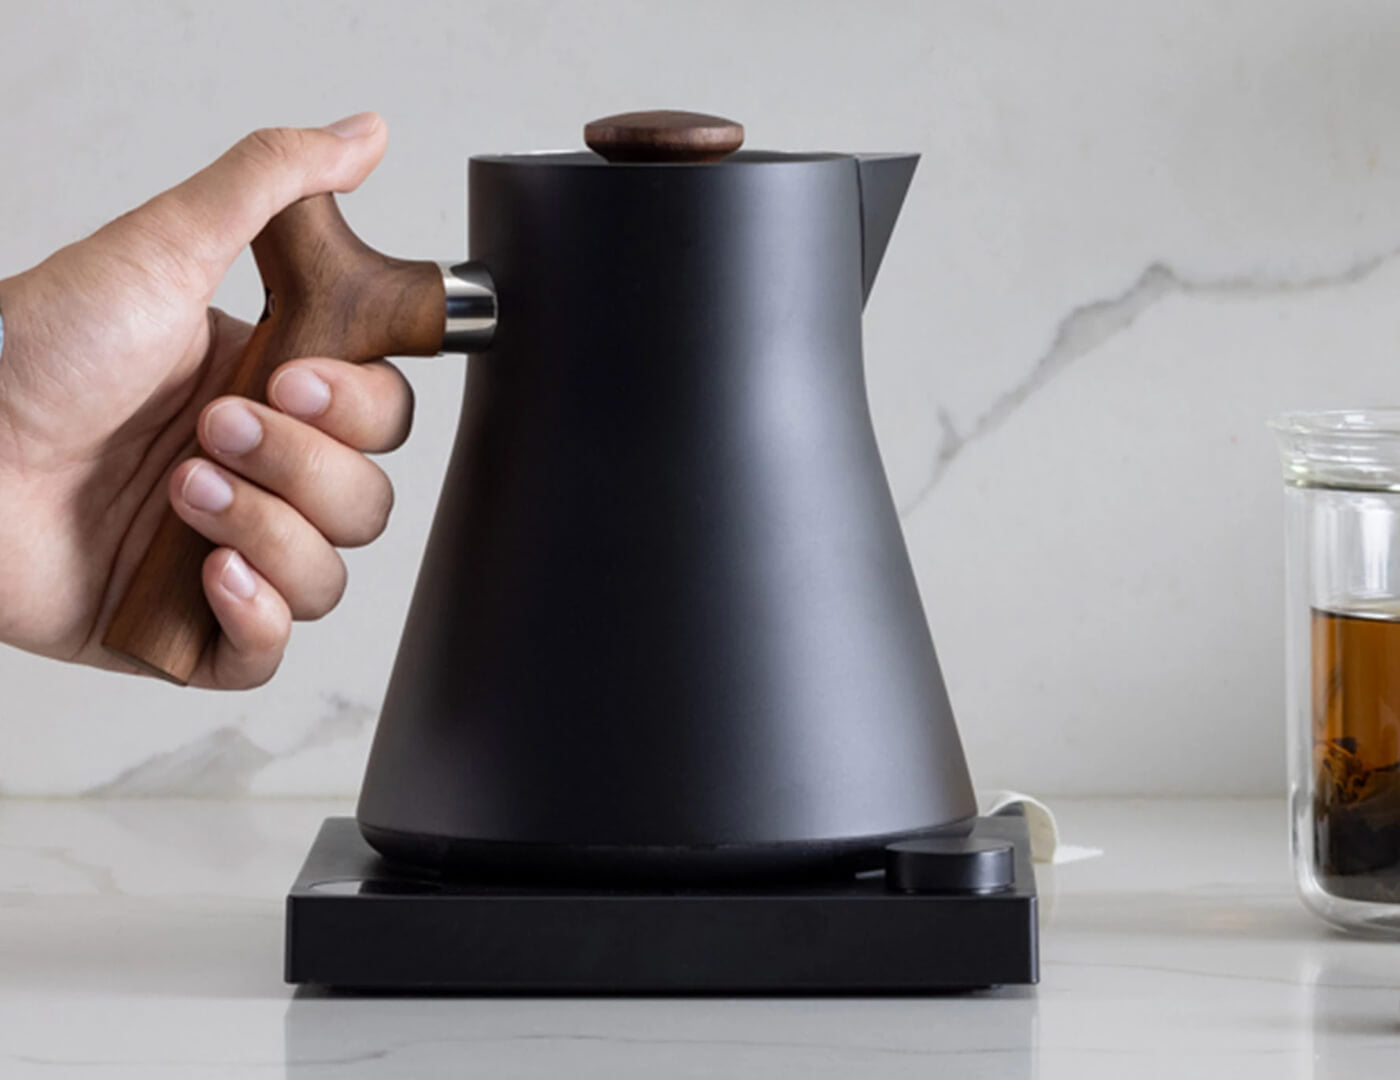 Hand on the handle of a Black Corvo Kettle EKG with Walnut handle, resting on the base